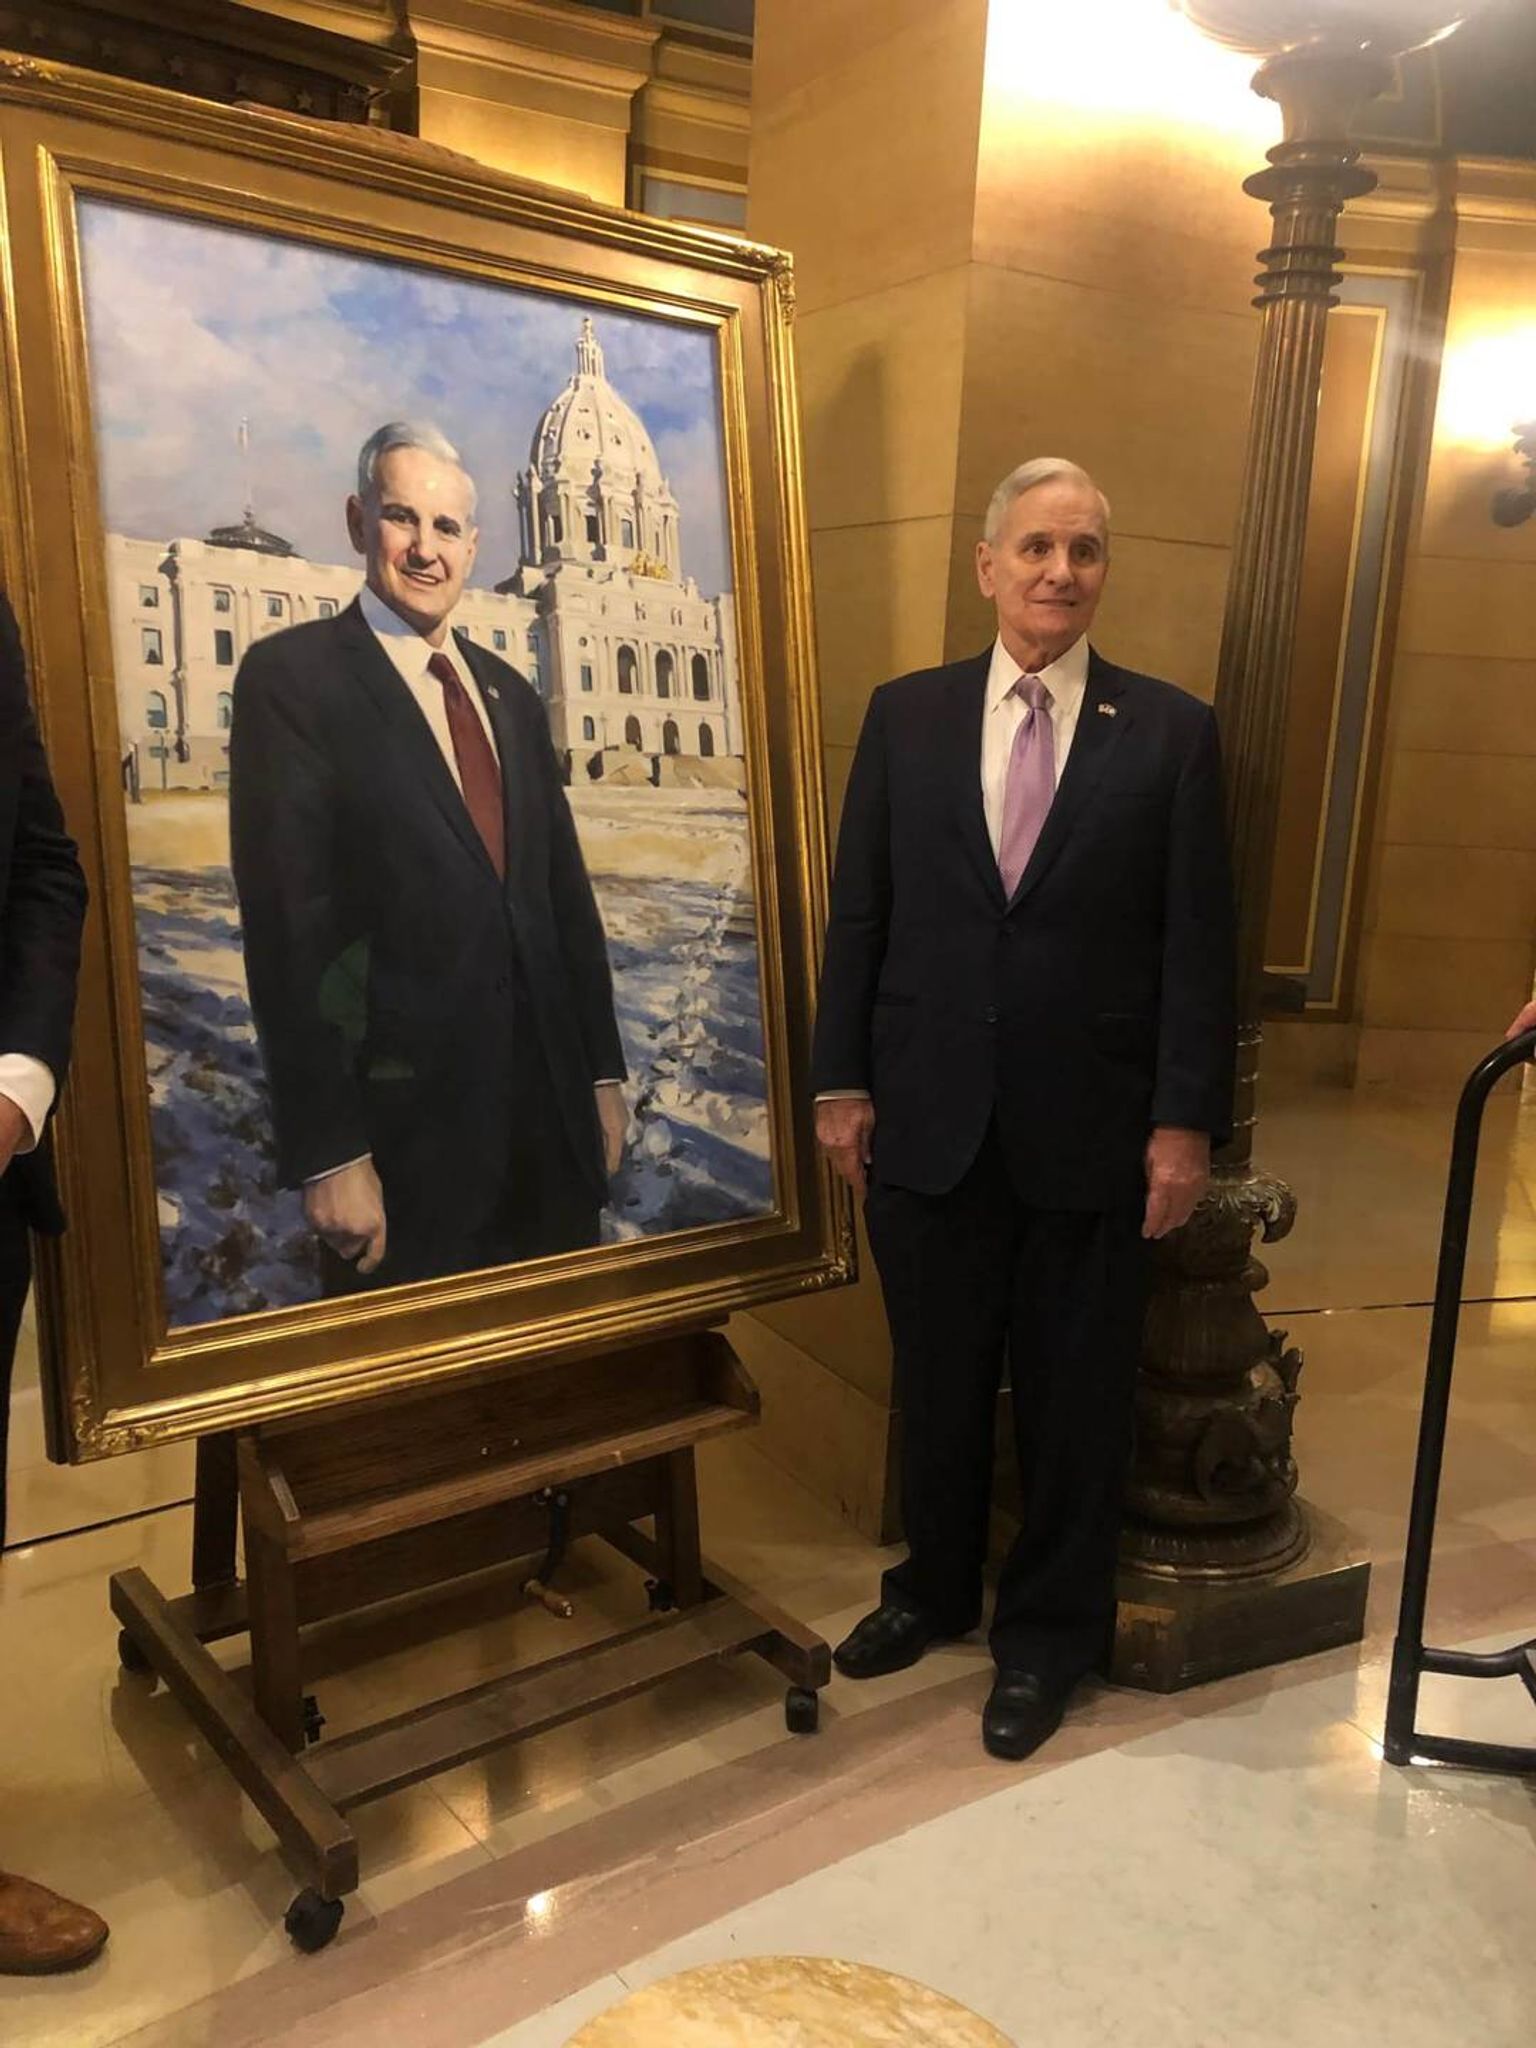 Gov. Mark Dayton at the Minnesota State Capitol for his official portrait unveiling